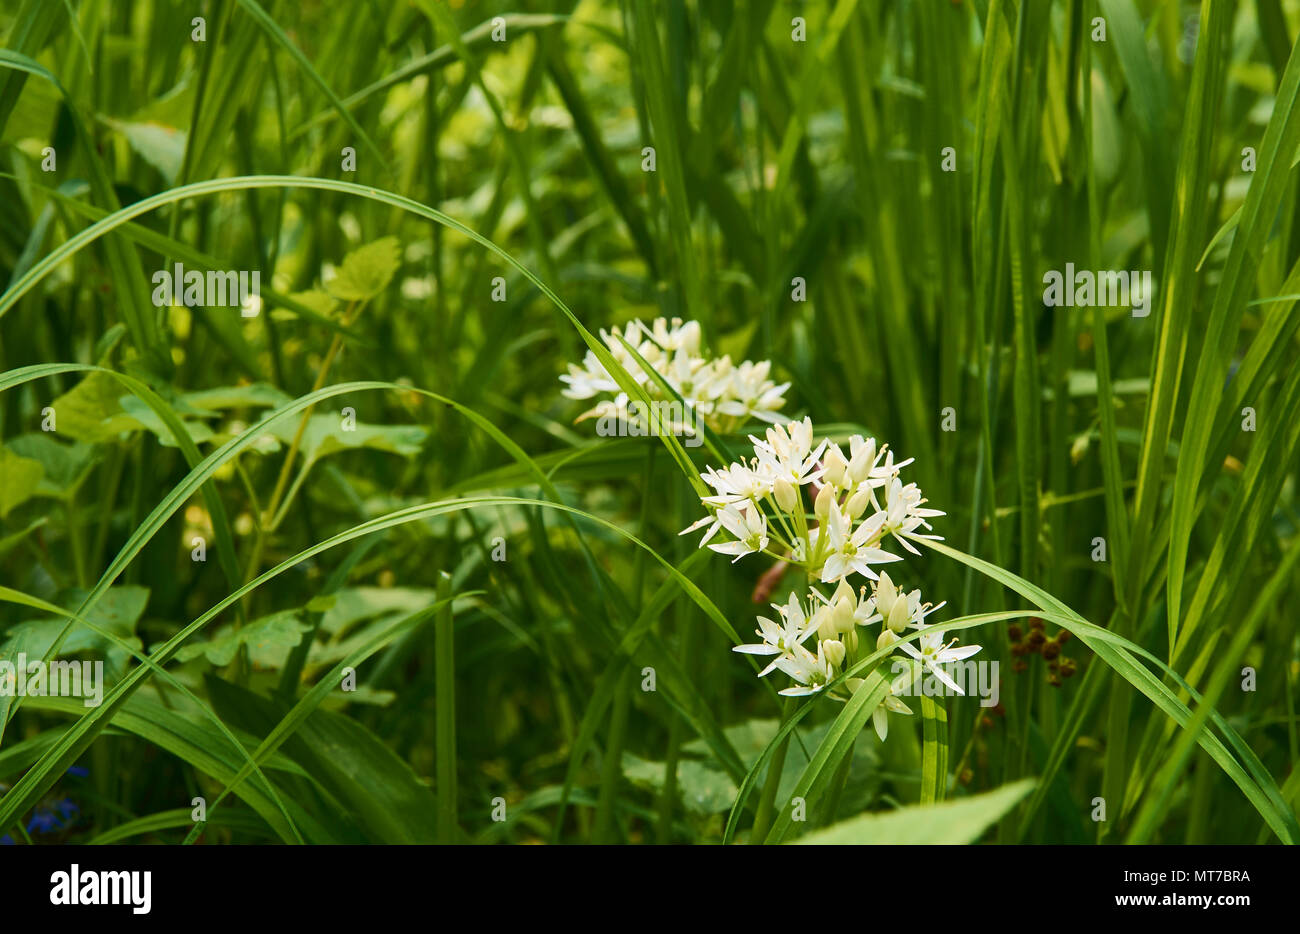 Flowers of wild garlic in the grass on a bright spring day Stock Photo